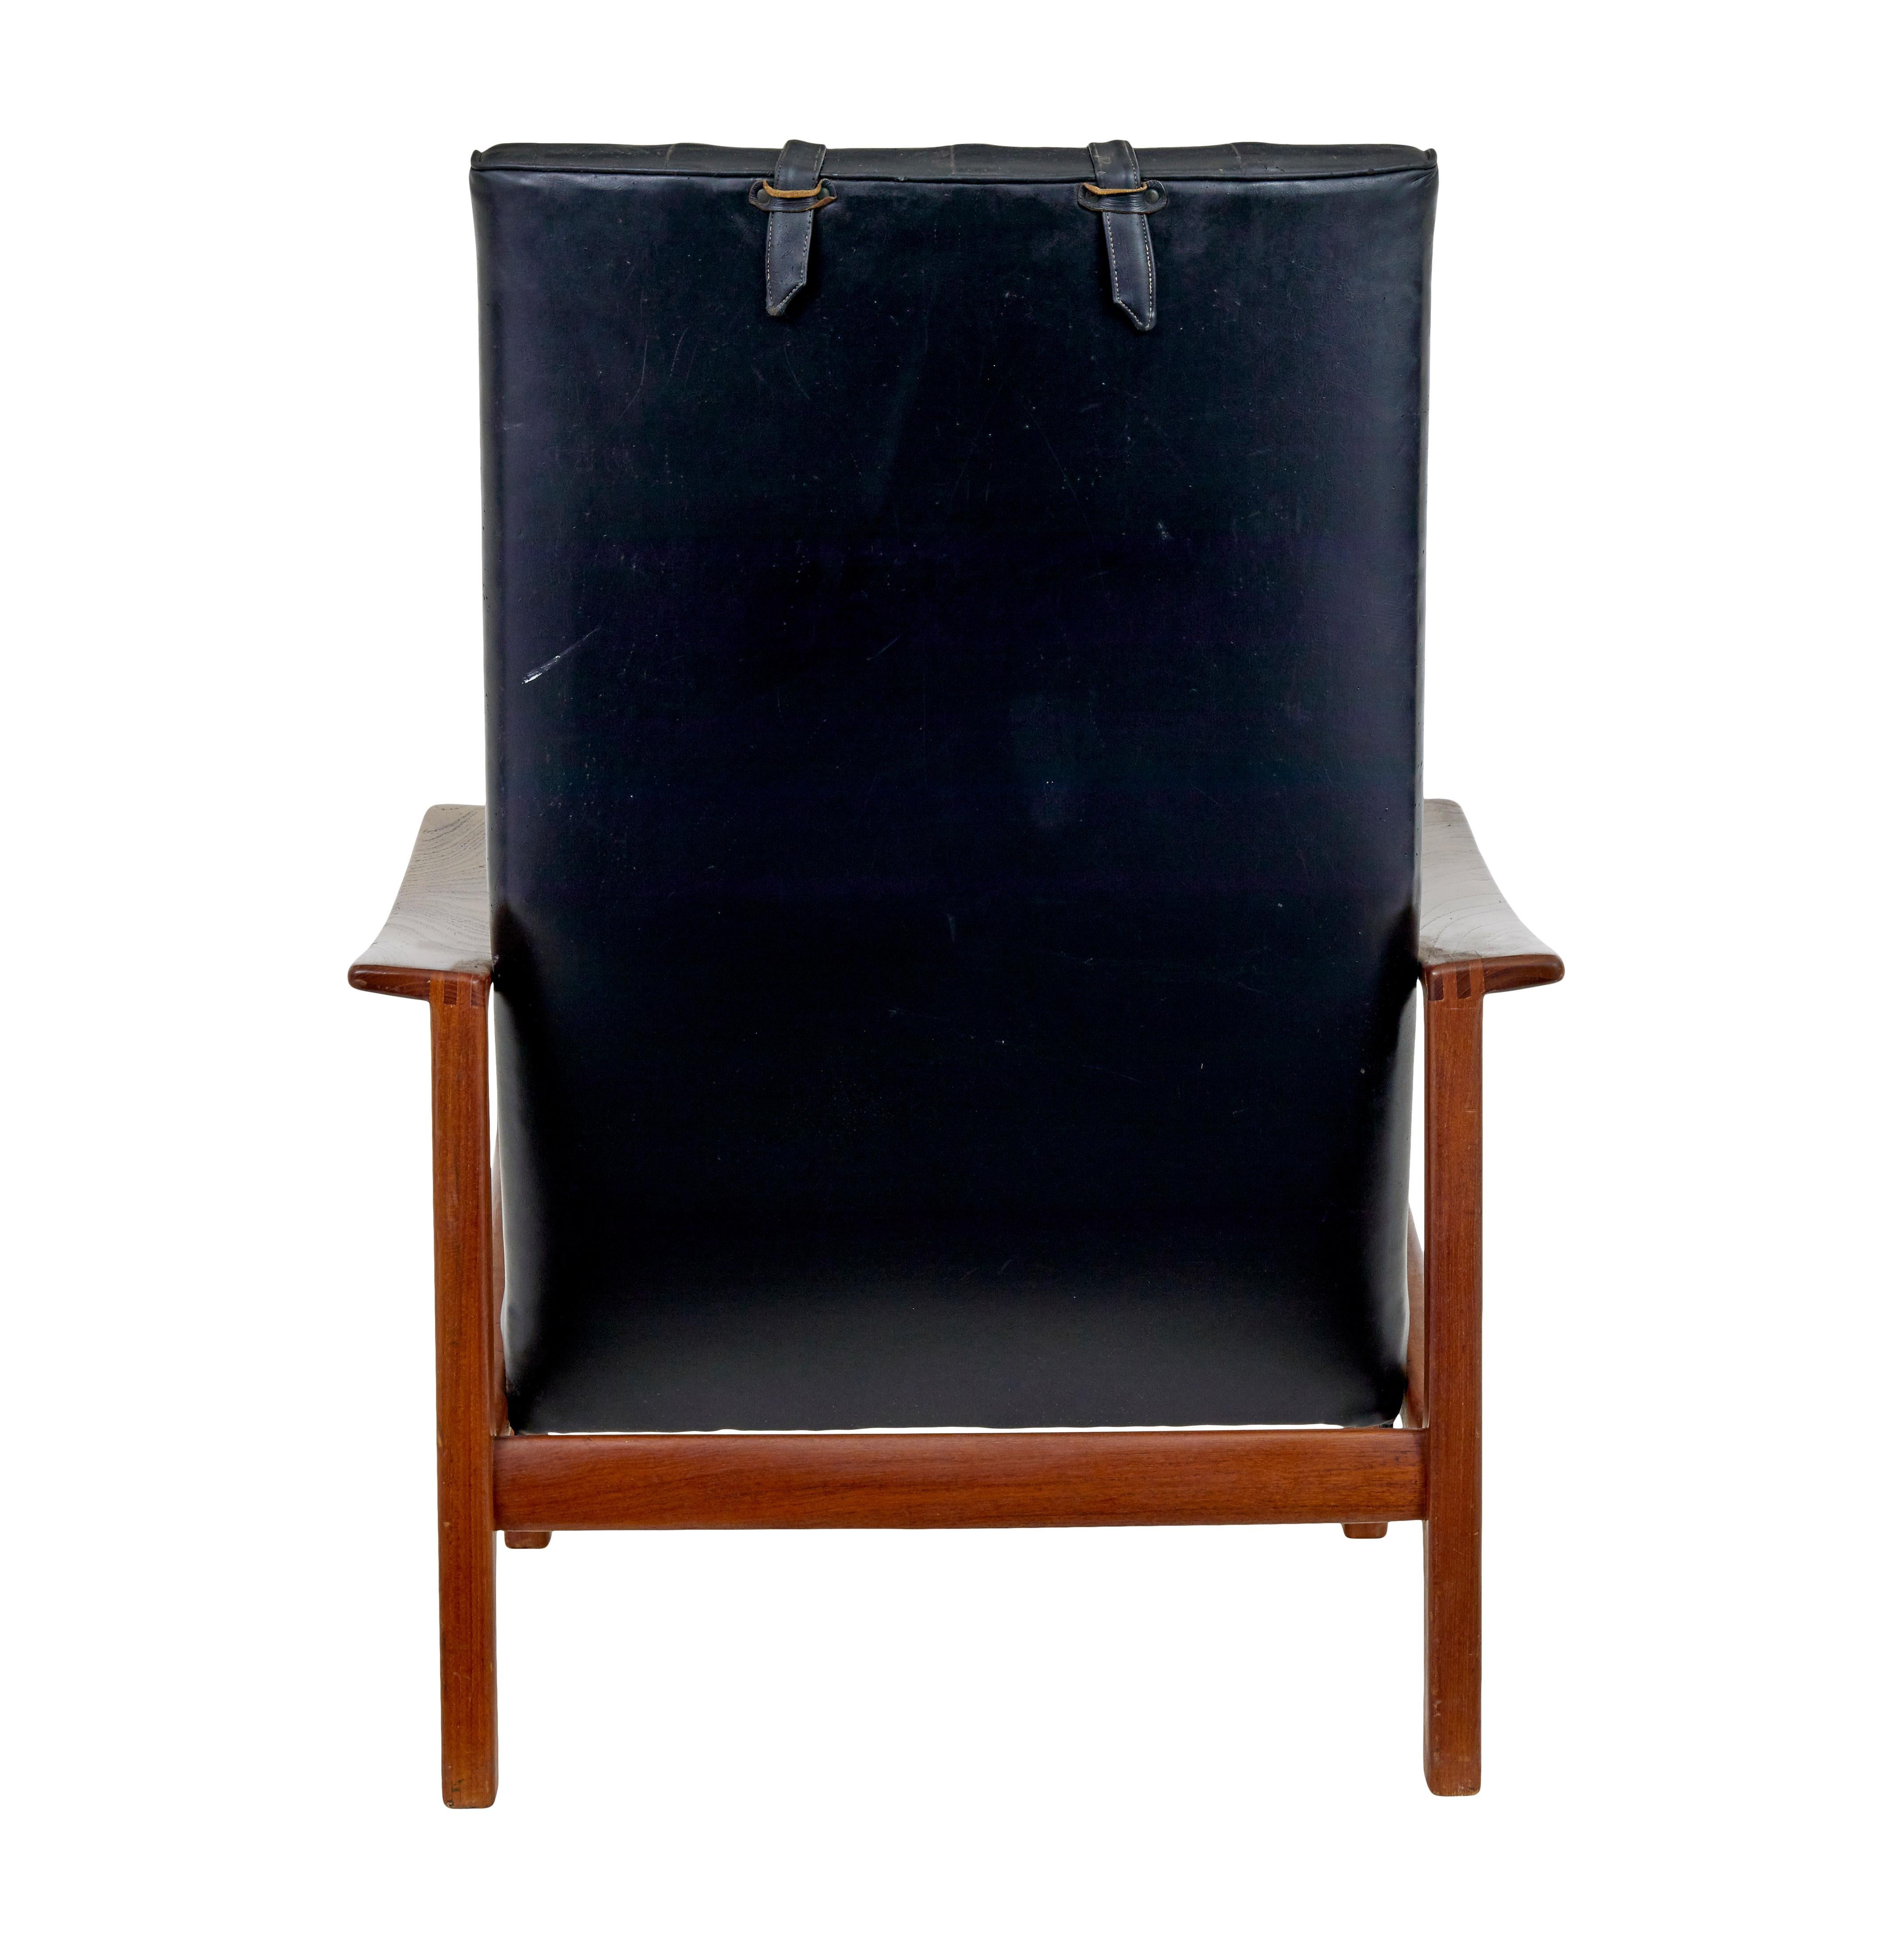 Hand-Crafted Mid 20th century Scandinavian modern teak reclining leather armchair For Sale